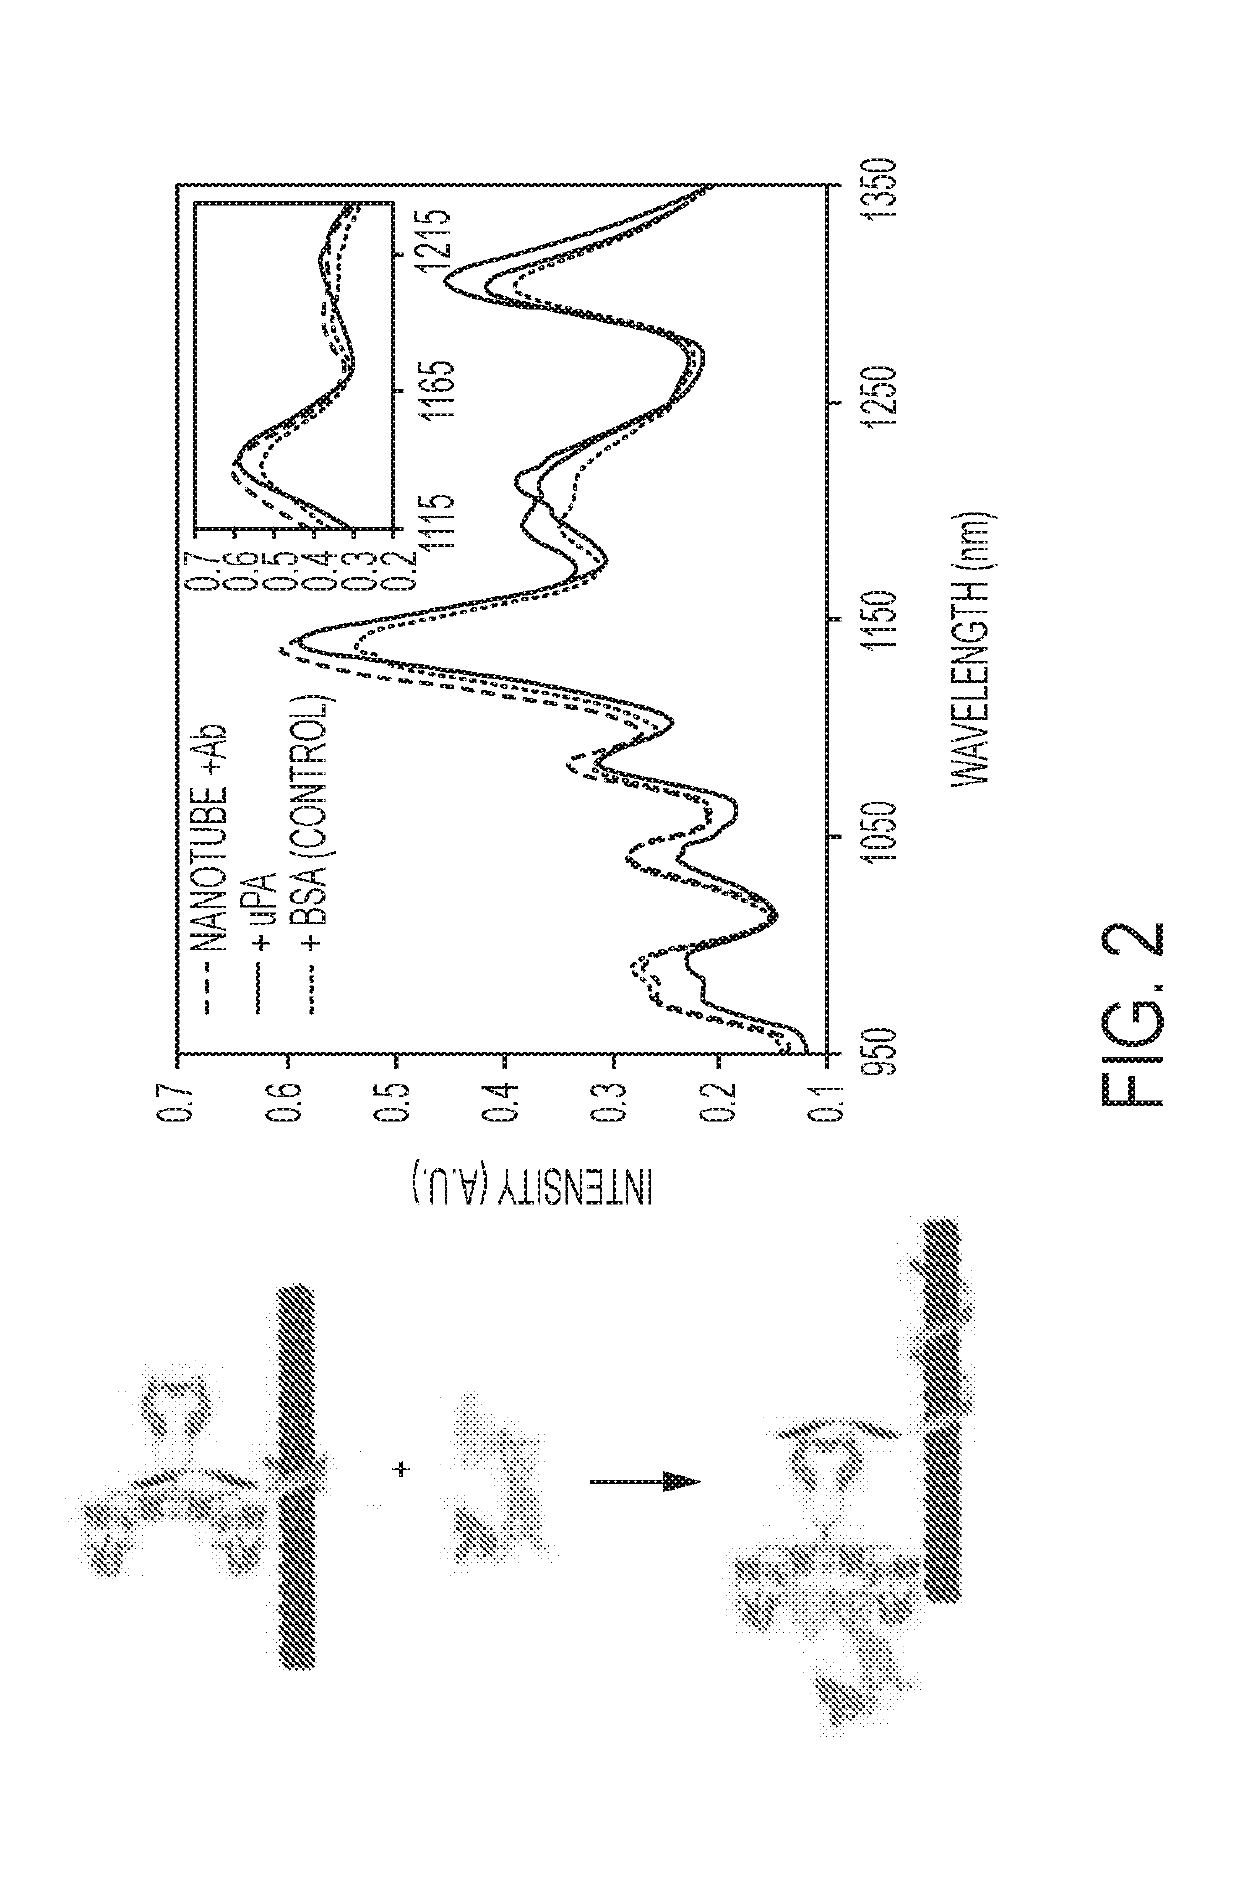 Swcnt-dna-antibody conjugates, related compositions, and systems, methods and devices for their use